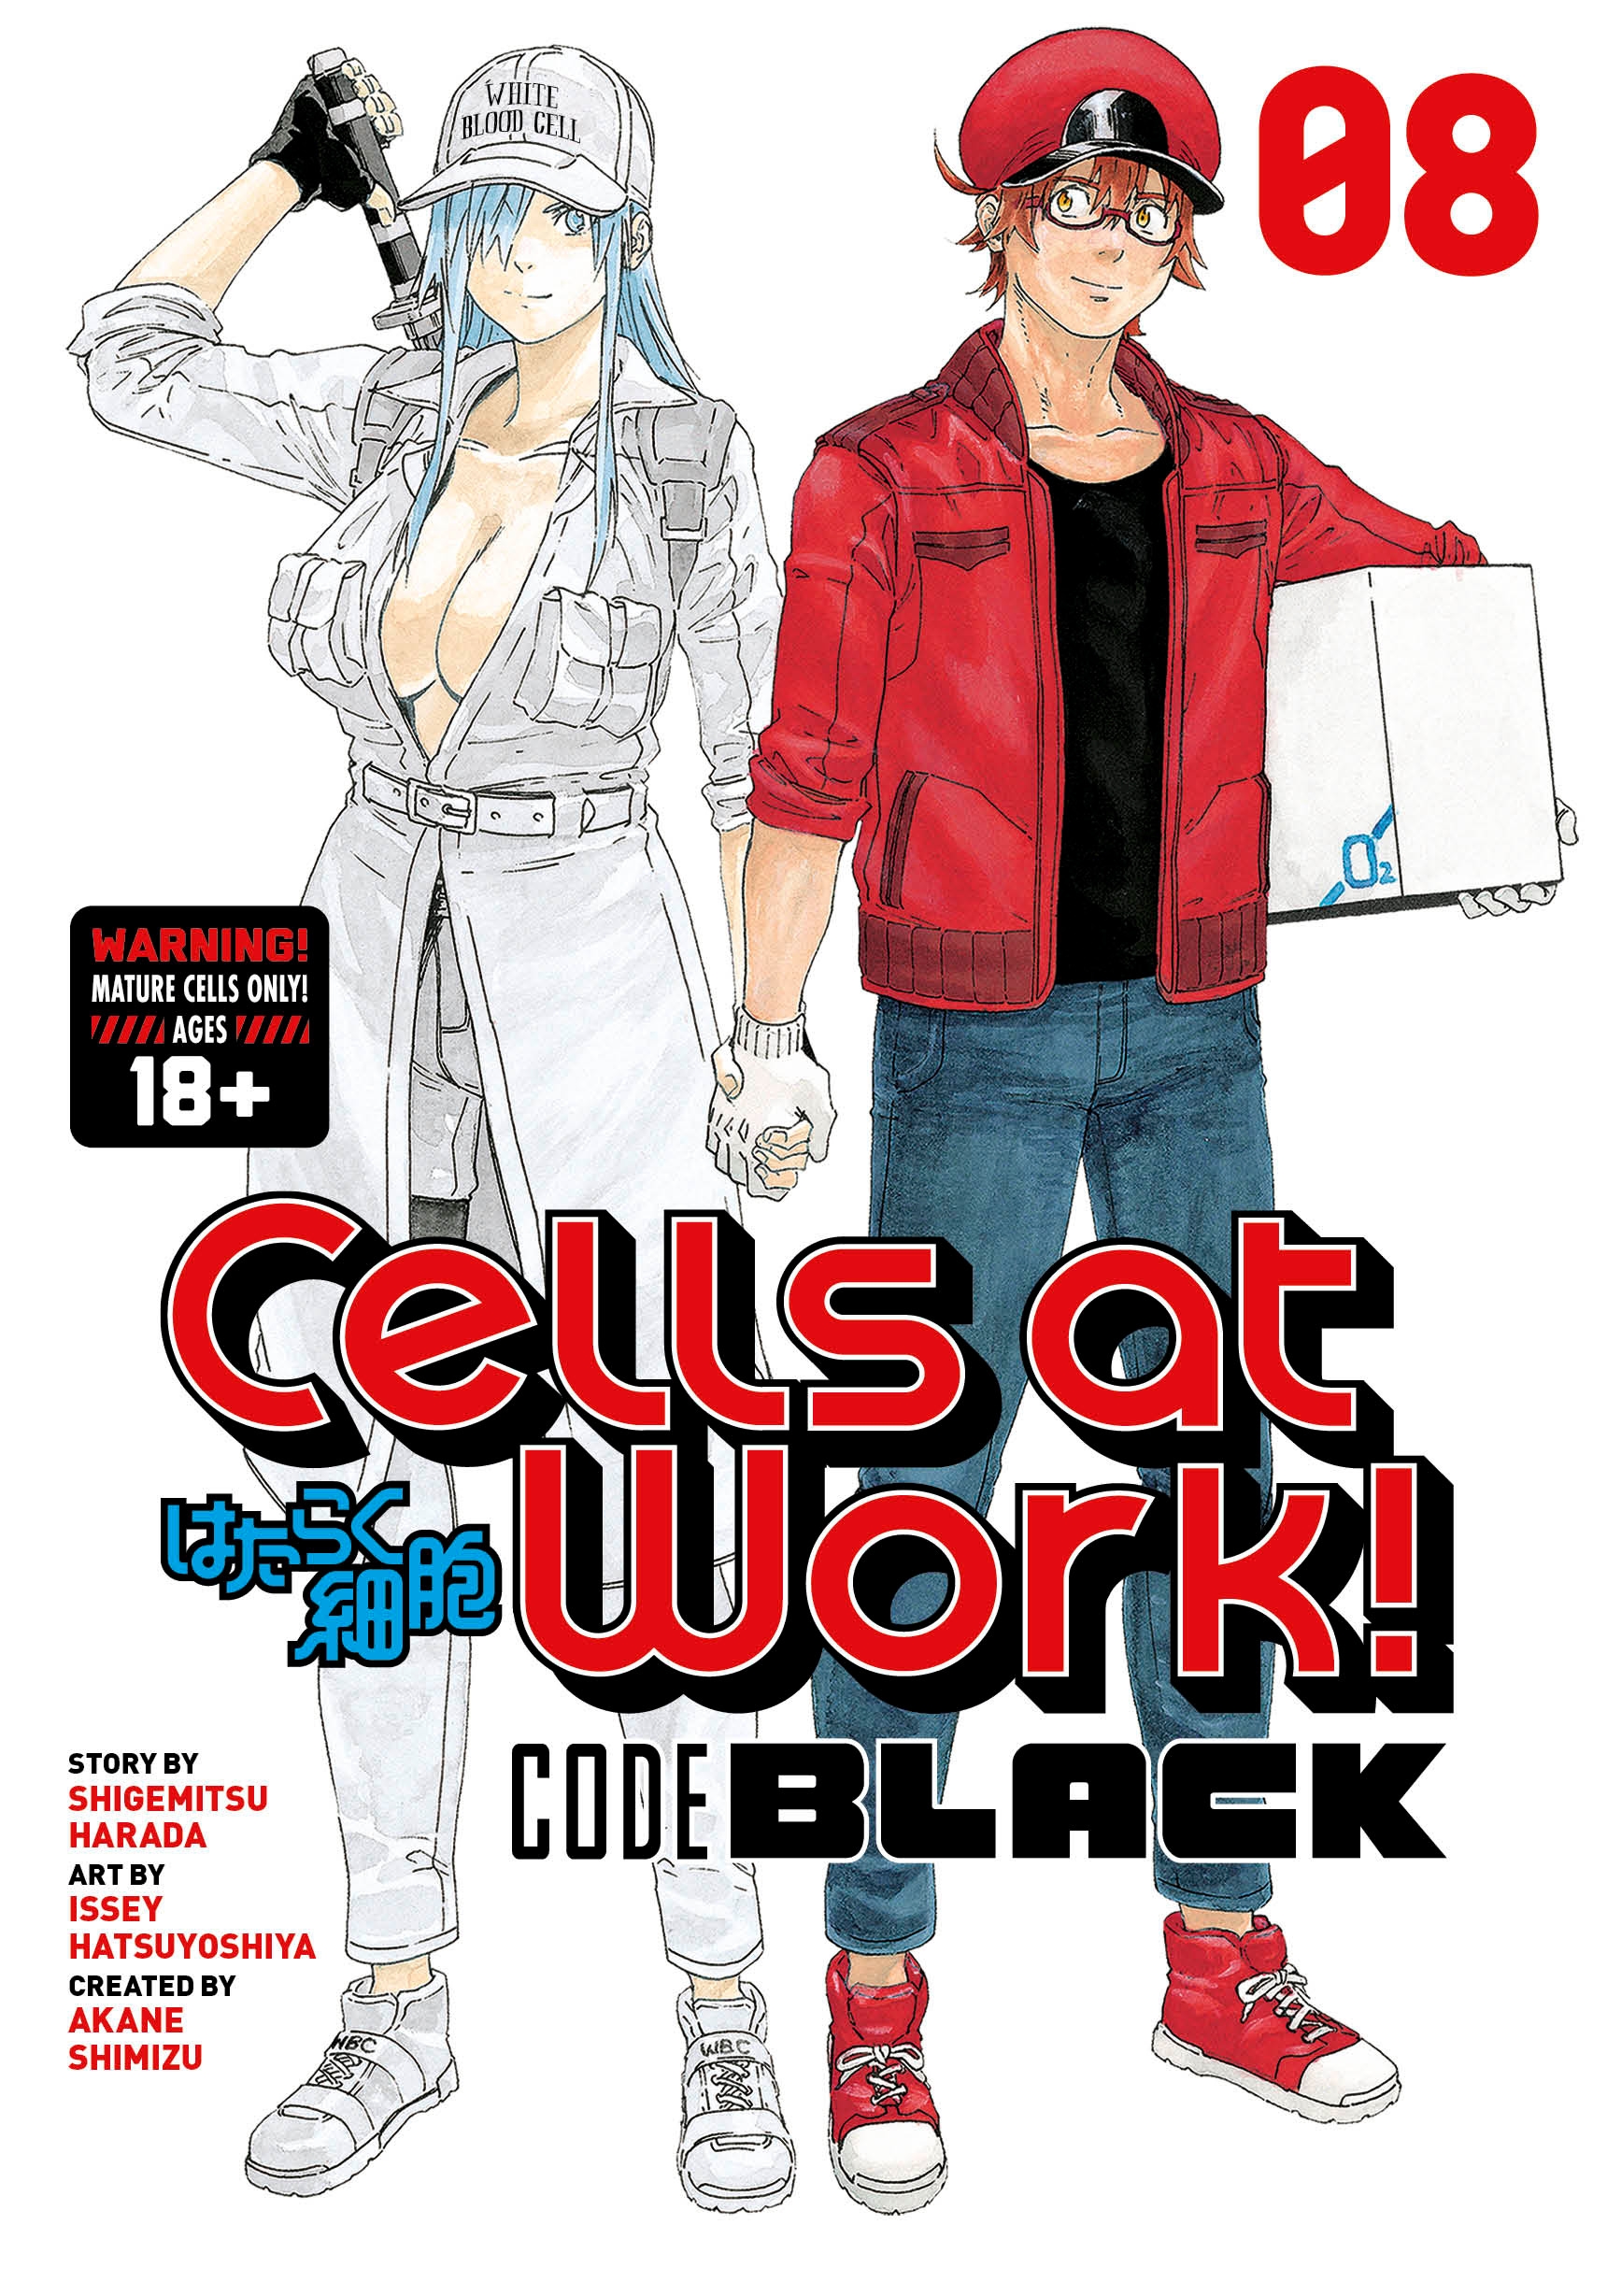 Cells at Work! Code Black - Wikipedia